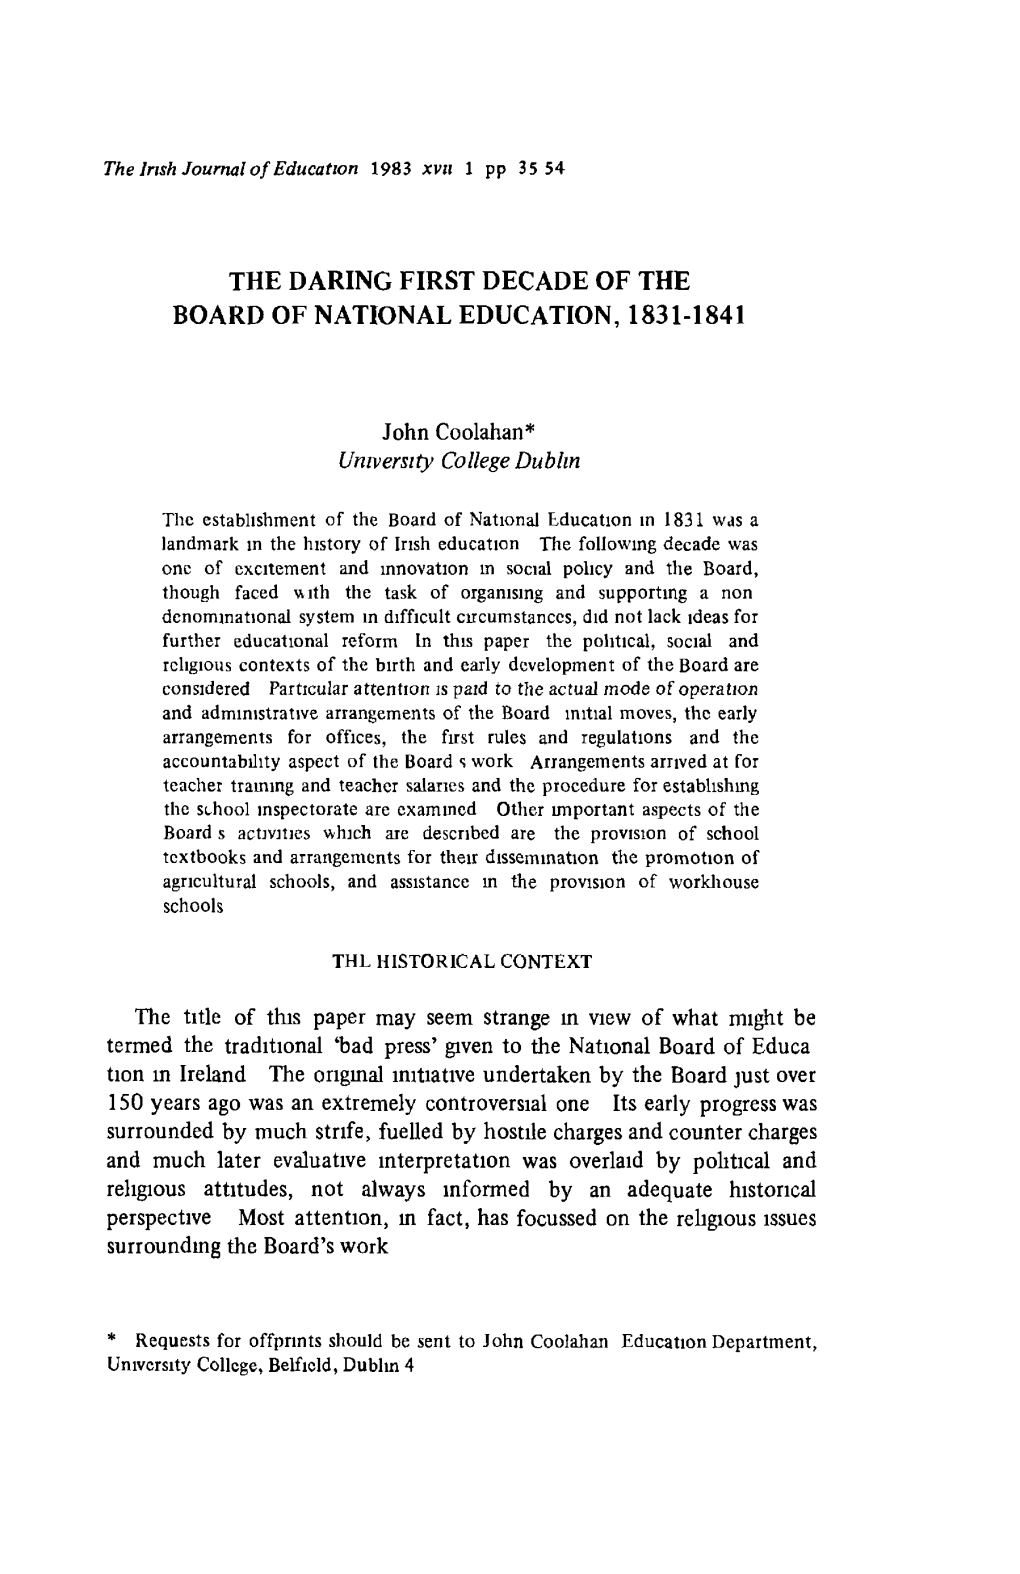 The Daring First Decade of the Board of National Education, 1831-1841